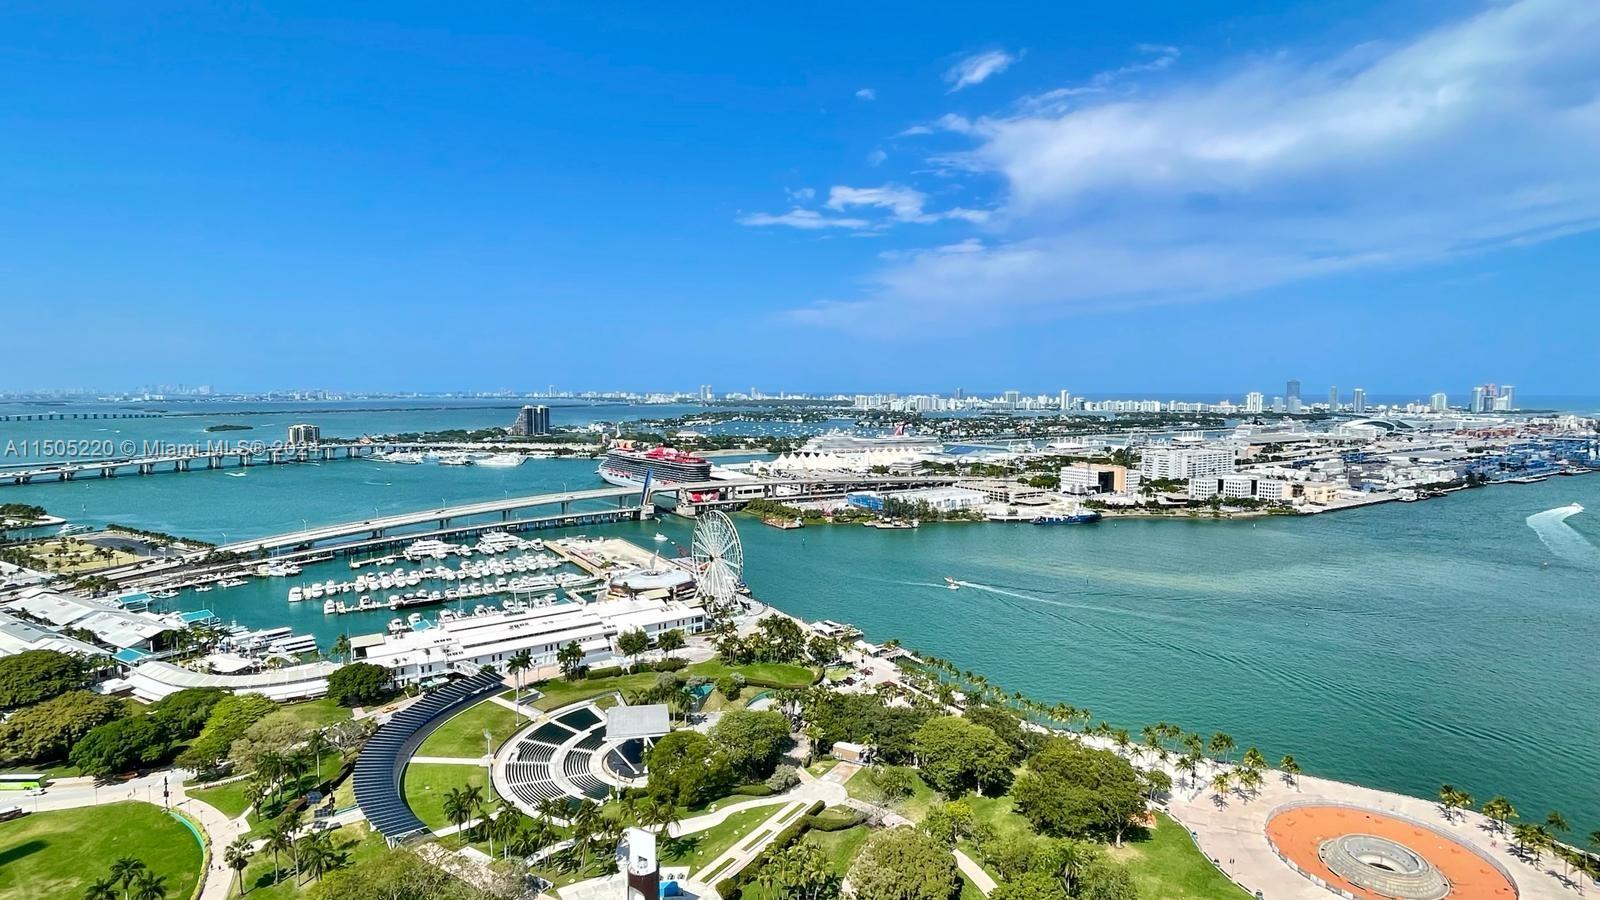 Beautiful corner unit,  3 Beds / 2 Baths condo walking distance from Kaseya Arena, Biscayne Bark, Bayside, Restaurants, Whole Foods, Frost and Perez museum and much more. The unit features tile floor throughout,  wrap around balconies so you can enjoy the breathtaking views of the Biscayne Bay, Miami Beach and Key Biscayne from the 41st floor of this luxury condominium in the heart of Downtown Miami. Amenities includes Olympic size pool, jacuzzi, nice equipped gym with group classes, spa, sauna, BBQ area, steam room to name few. Assigned parking. Fully furnished.